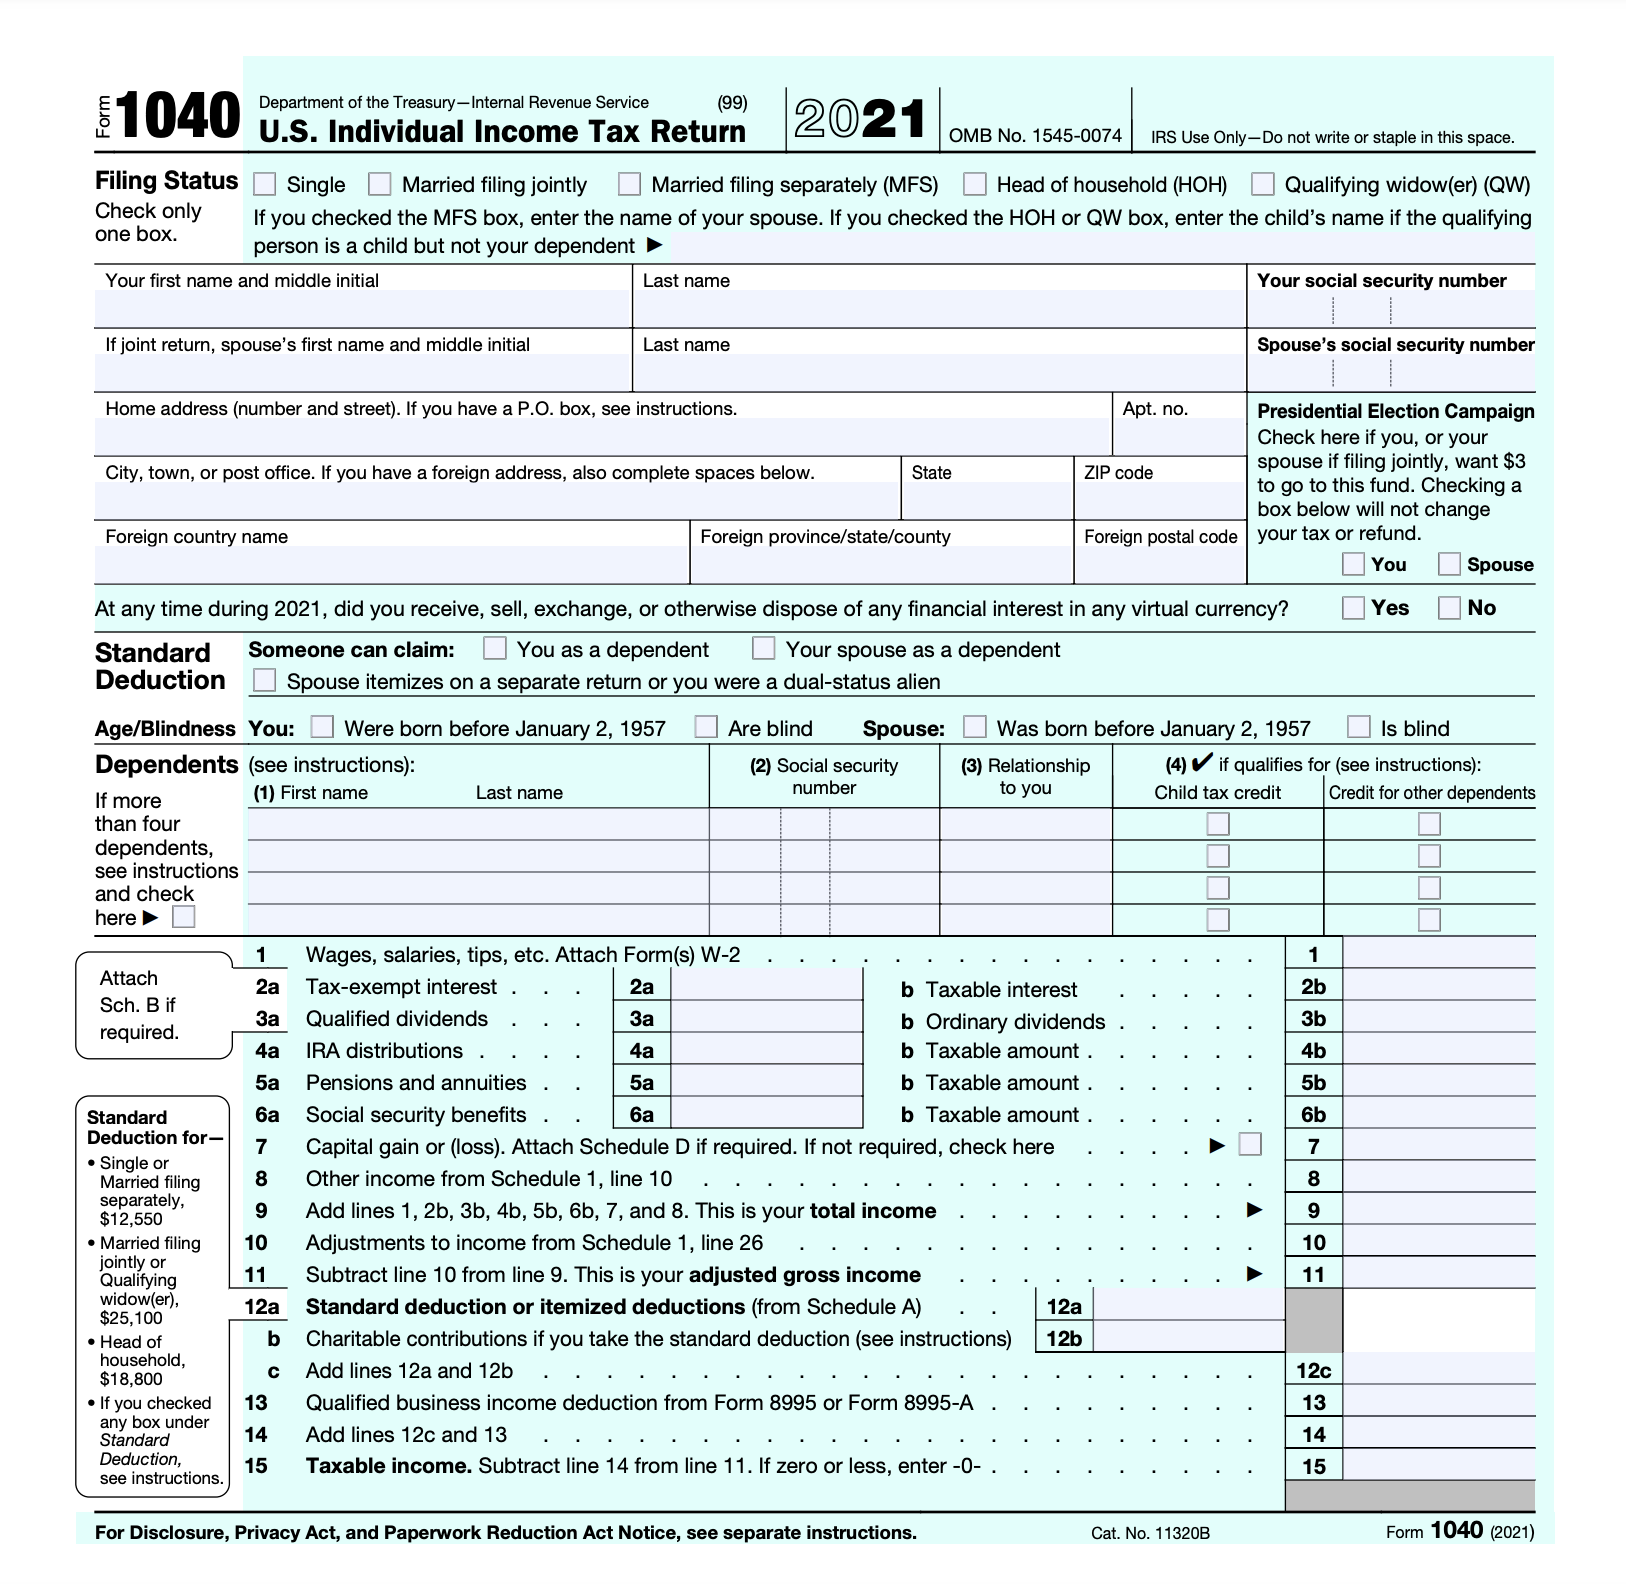 printable-tax-form-1040ez-printable-form-templates-and-letter